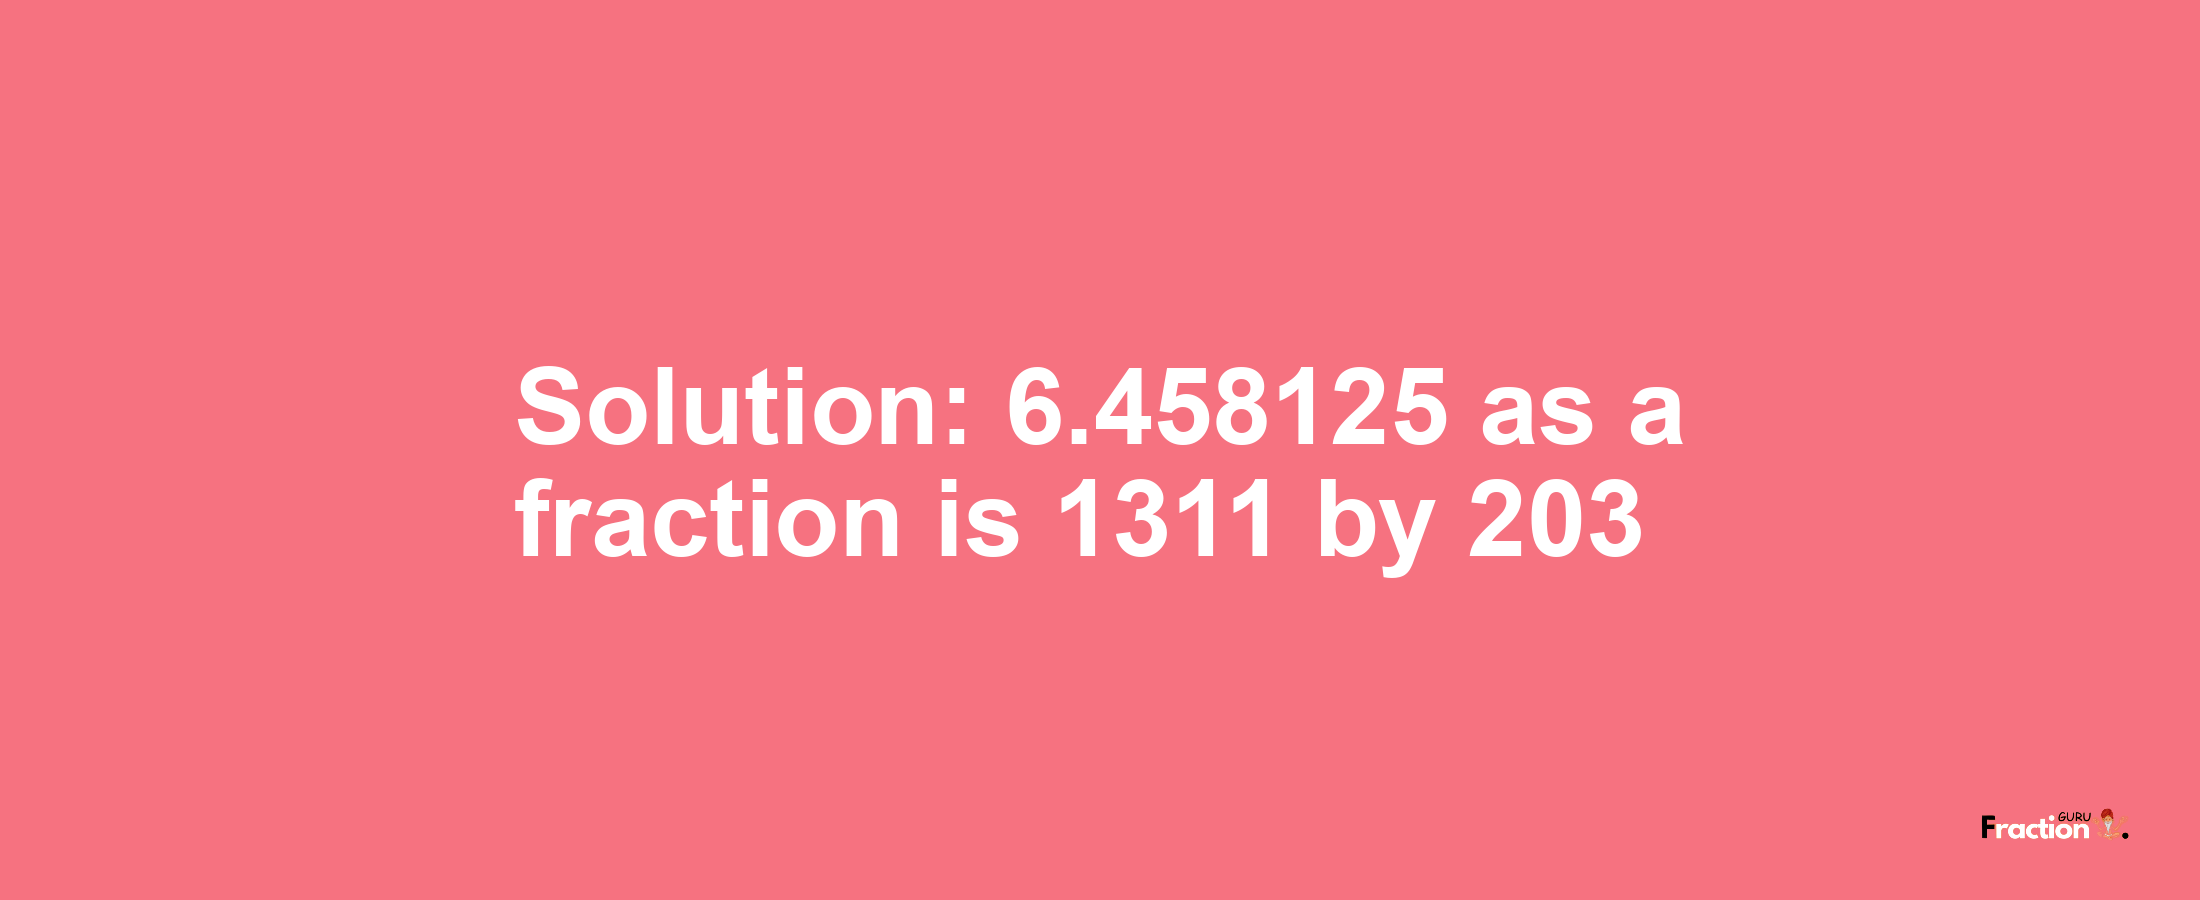 Solution:6.458125 as a fraction is 1311/203